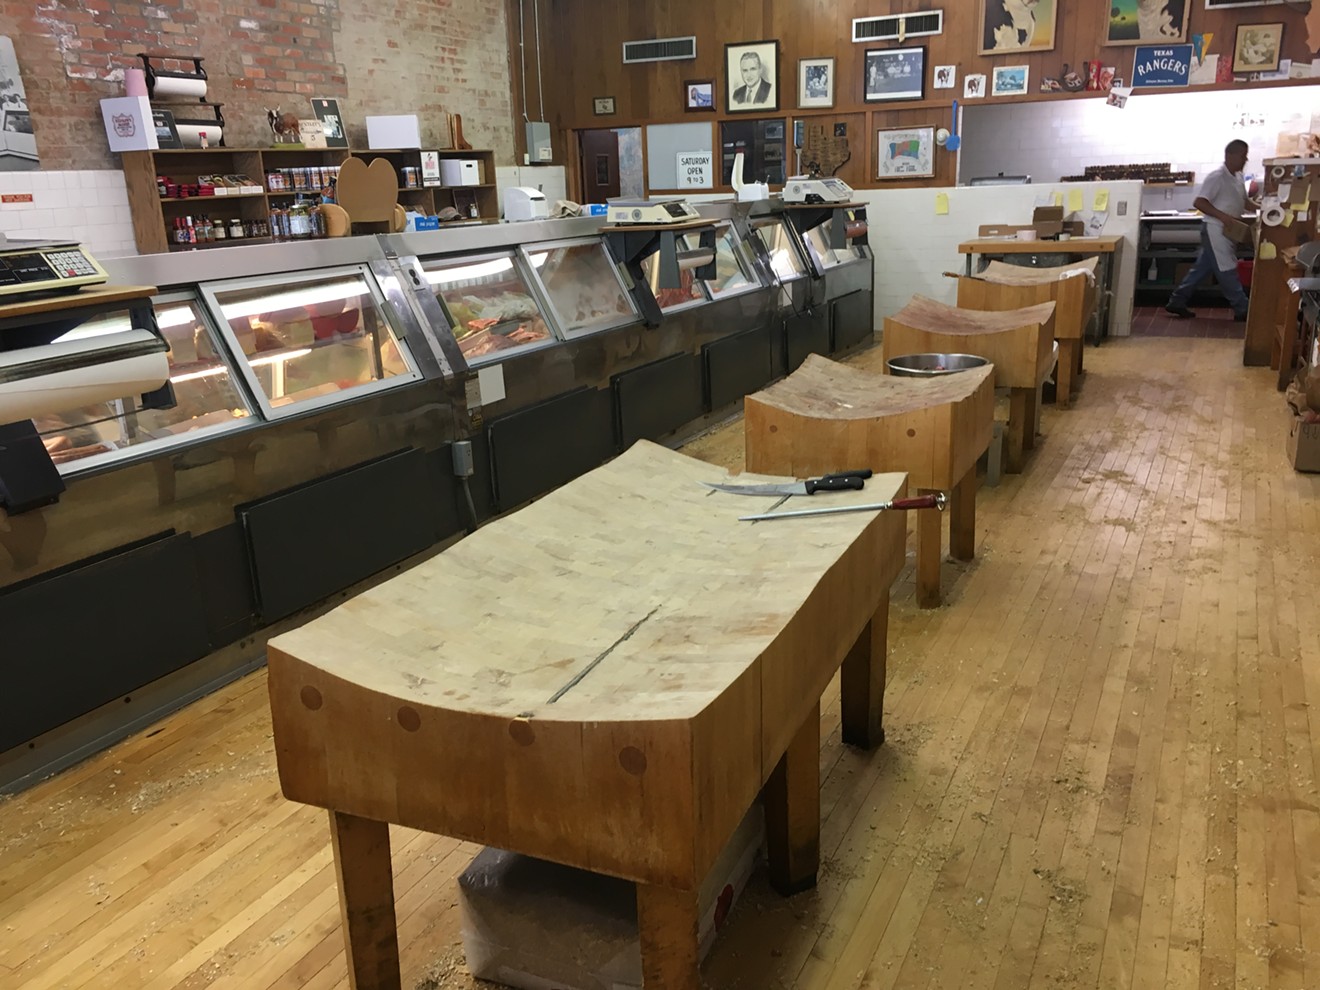 The decades-old butcher blocks at Rudolph's. The one in the foreground is around 90 years old.